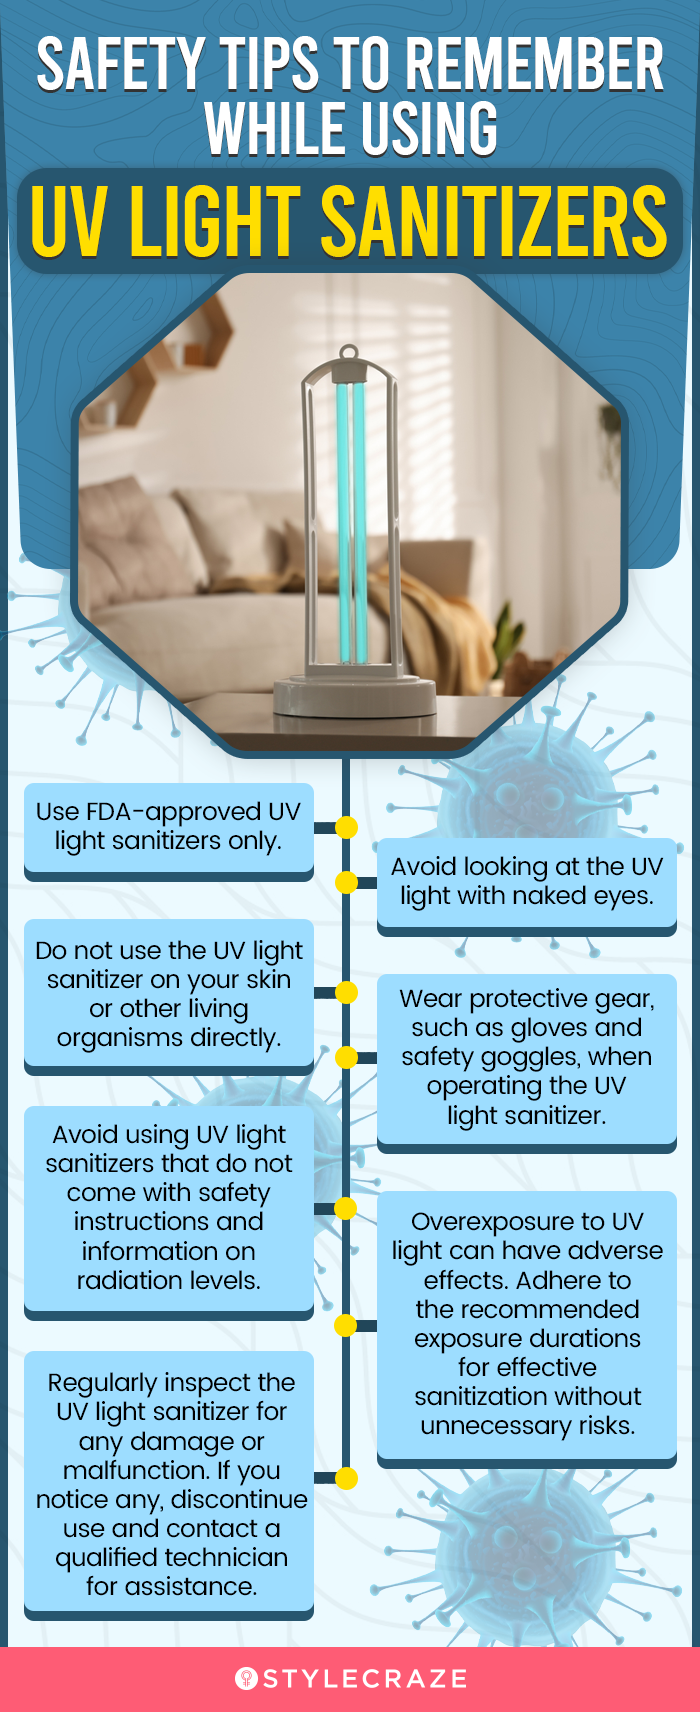 Safety Tips To Remember While Using UV Light Sanitizers (infographic)